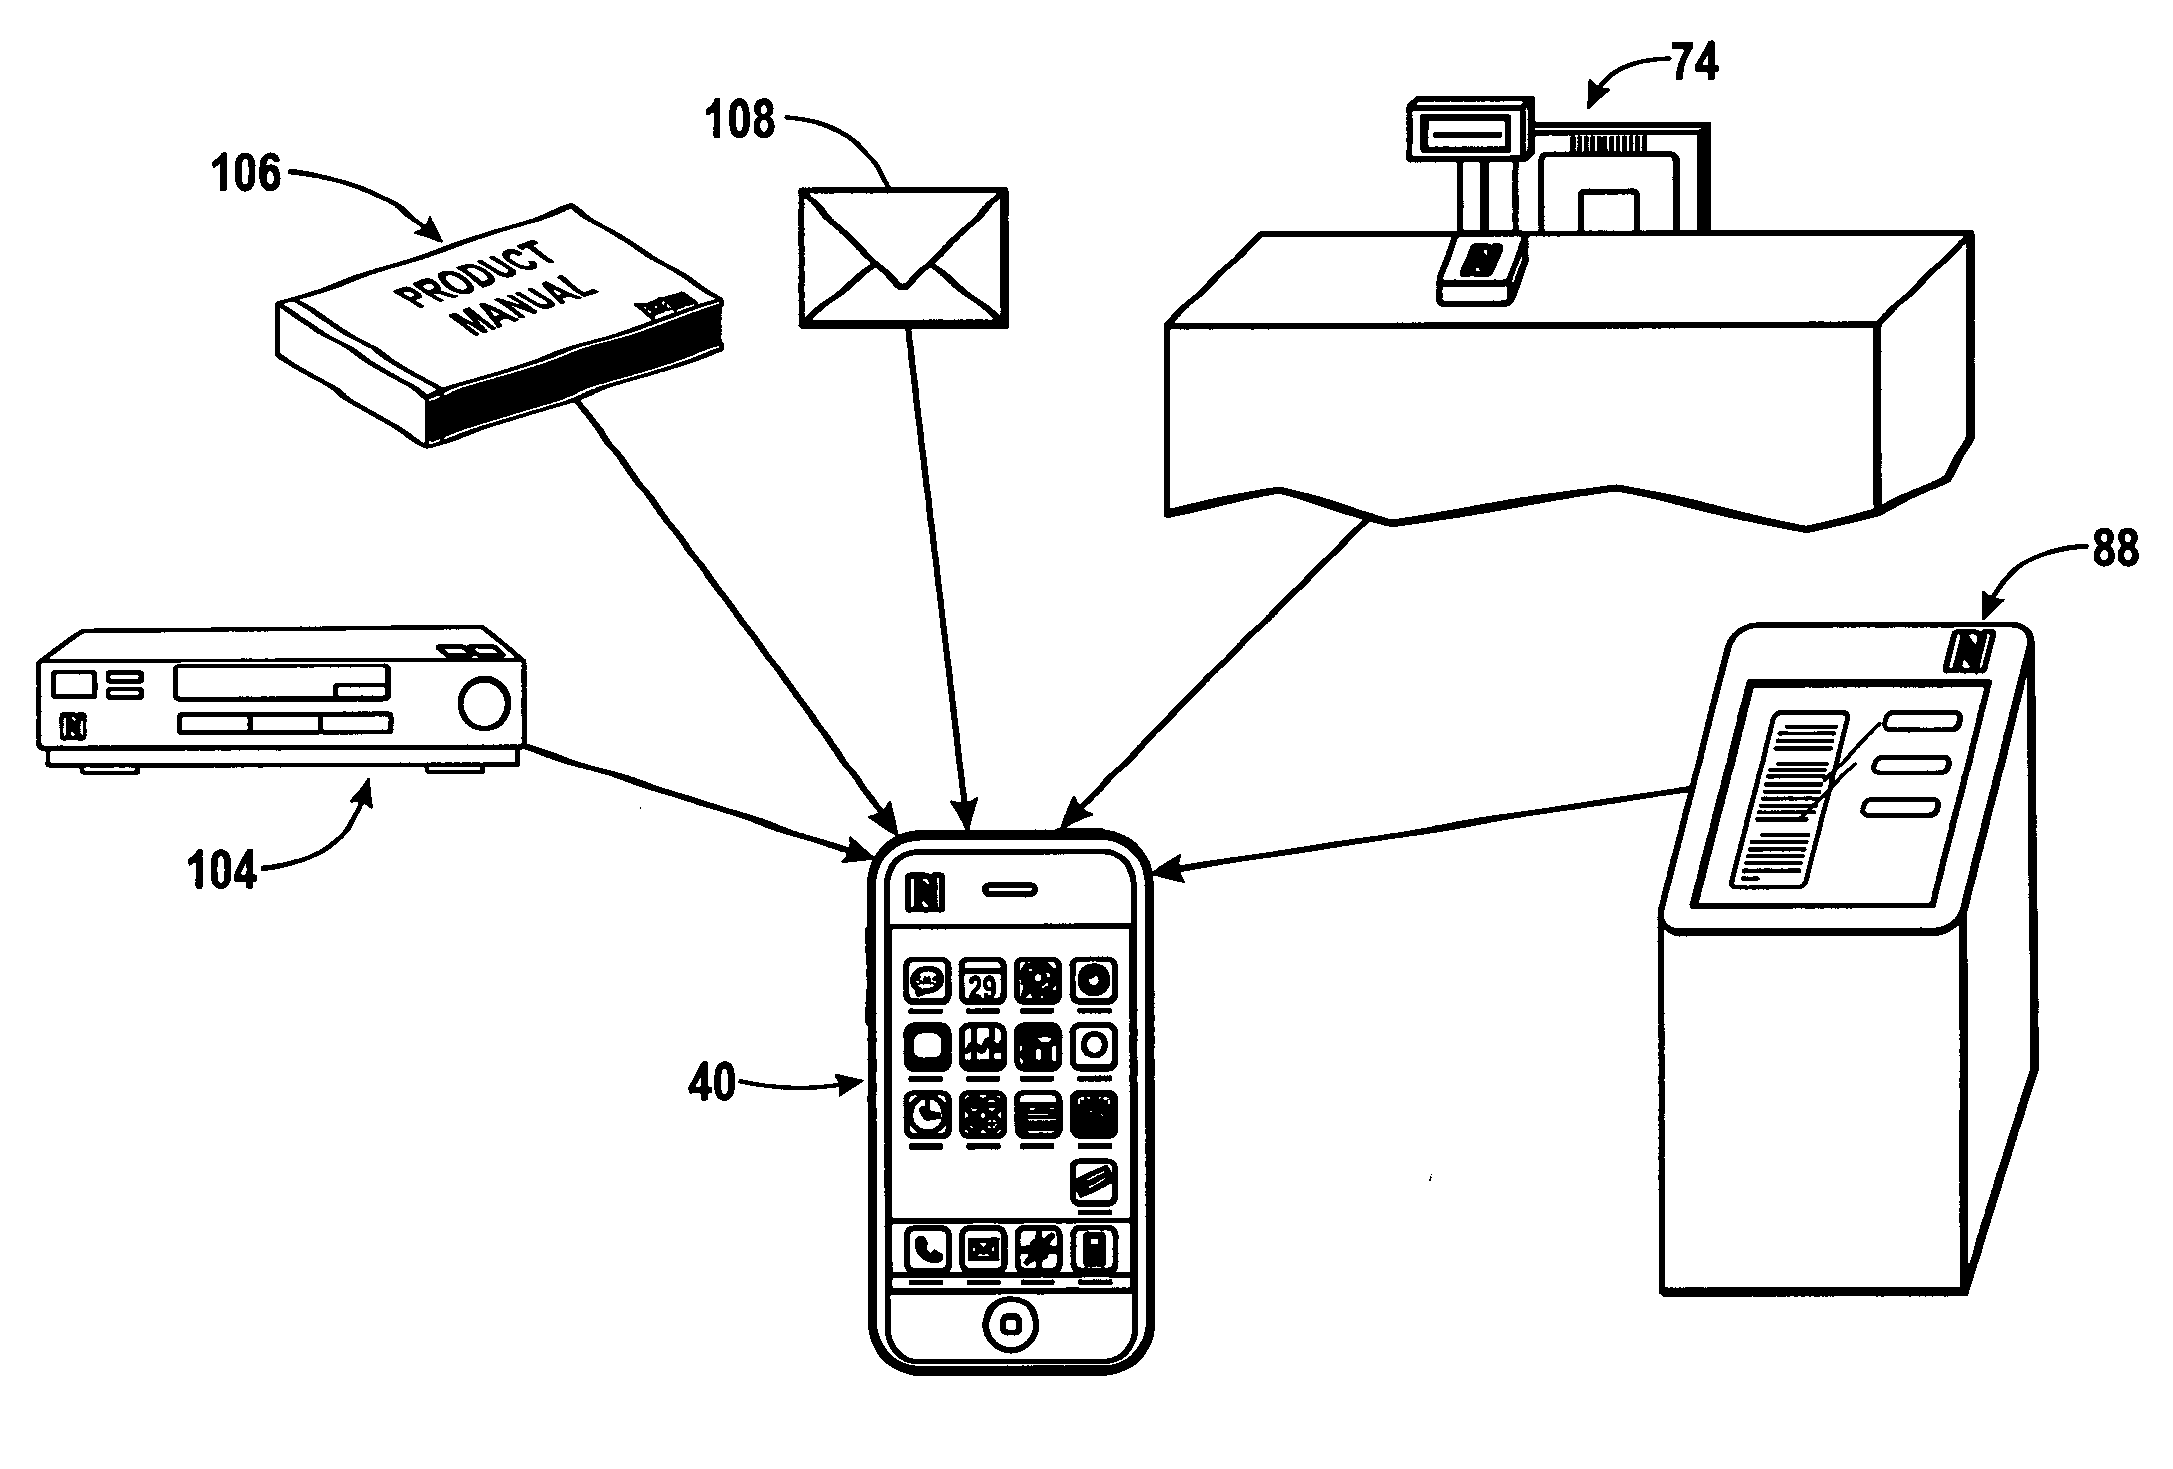 System and method for providing content associated with a product or service